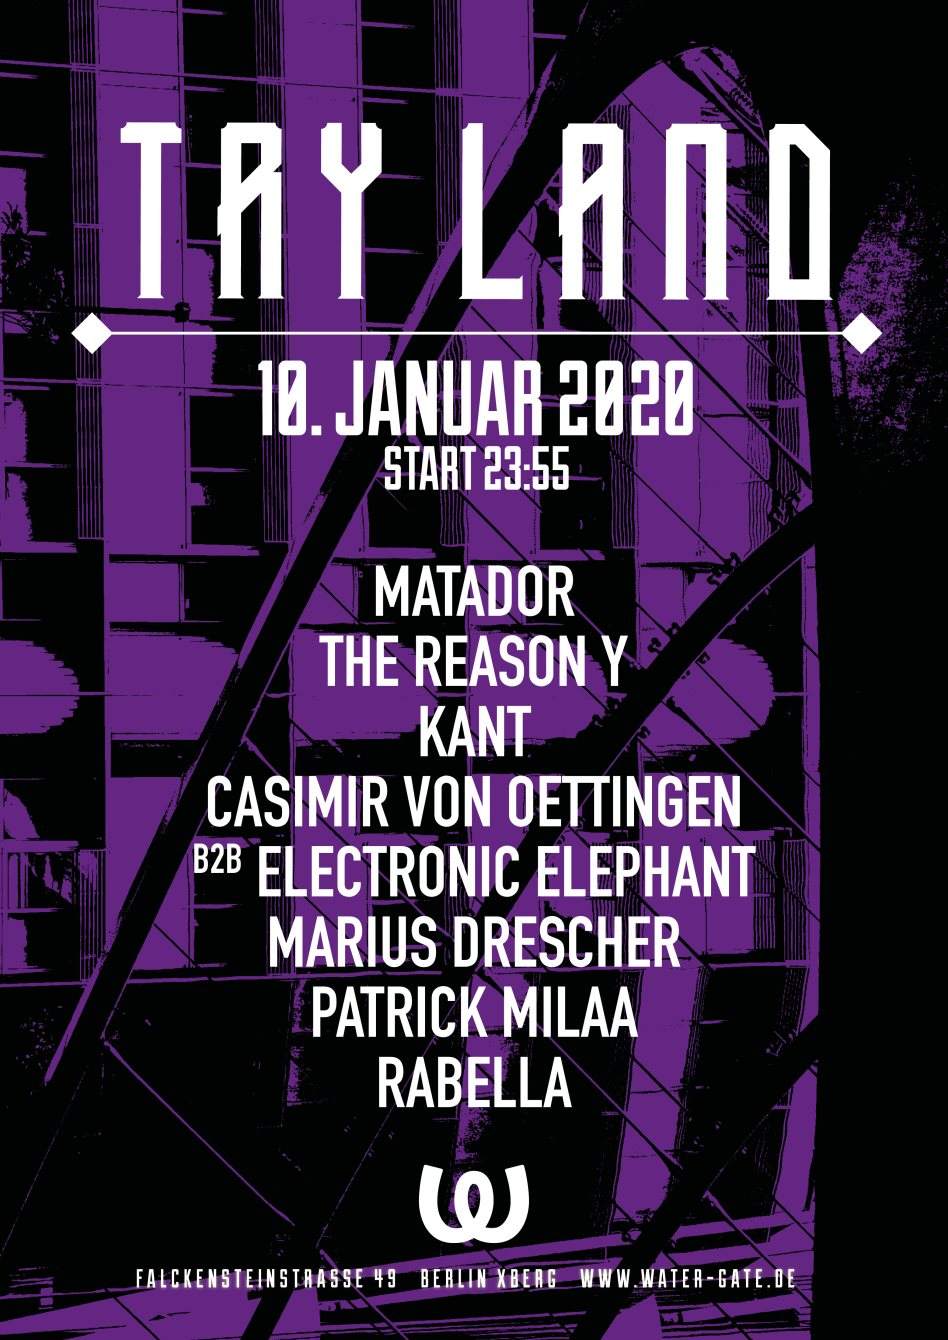 Try Land with Matador, The Reason Y, Kant, Casimir von Oettingen, Electronic Elephant and More - Página frontal